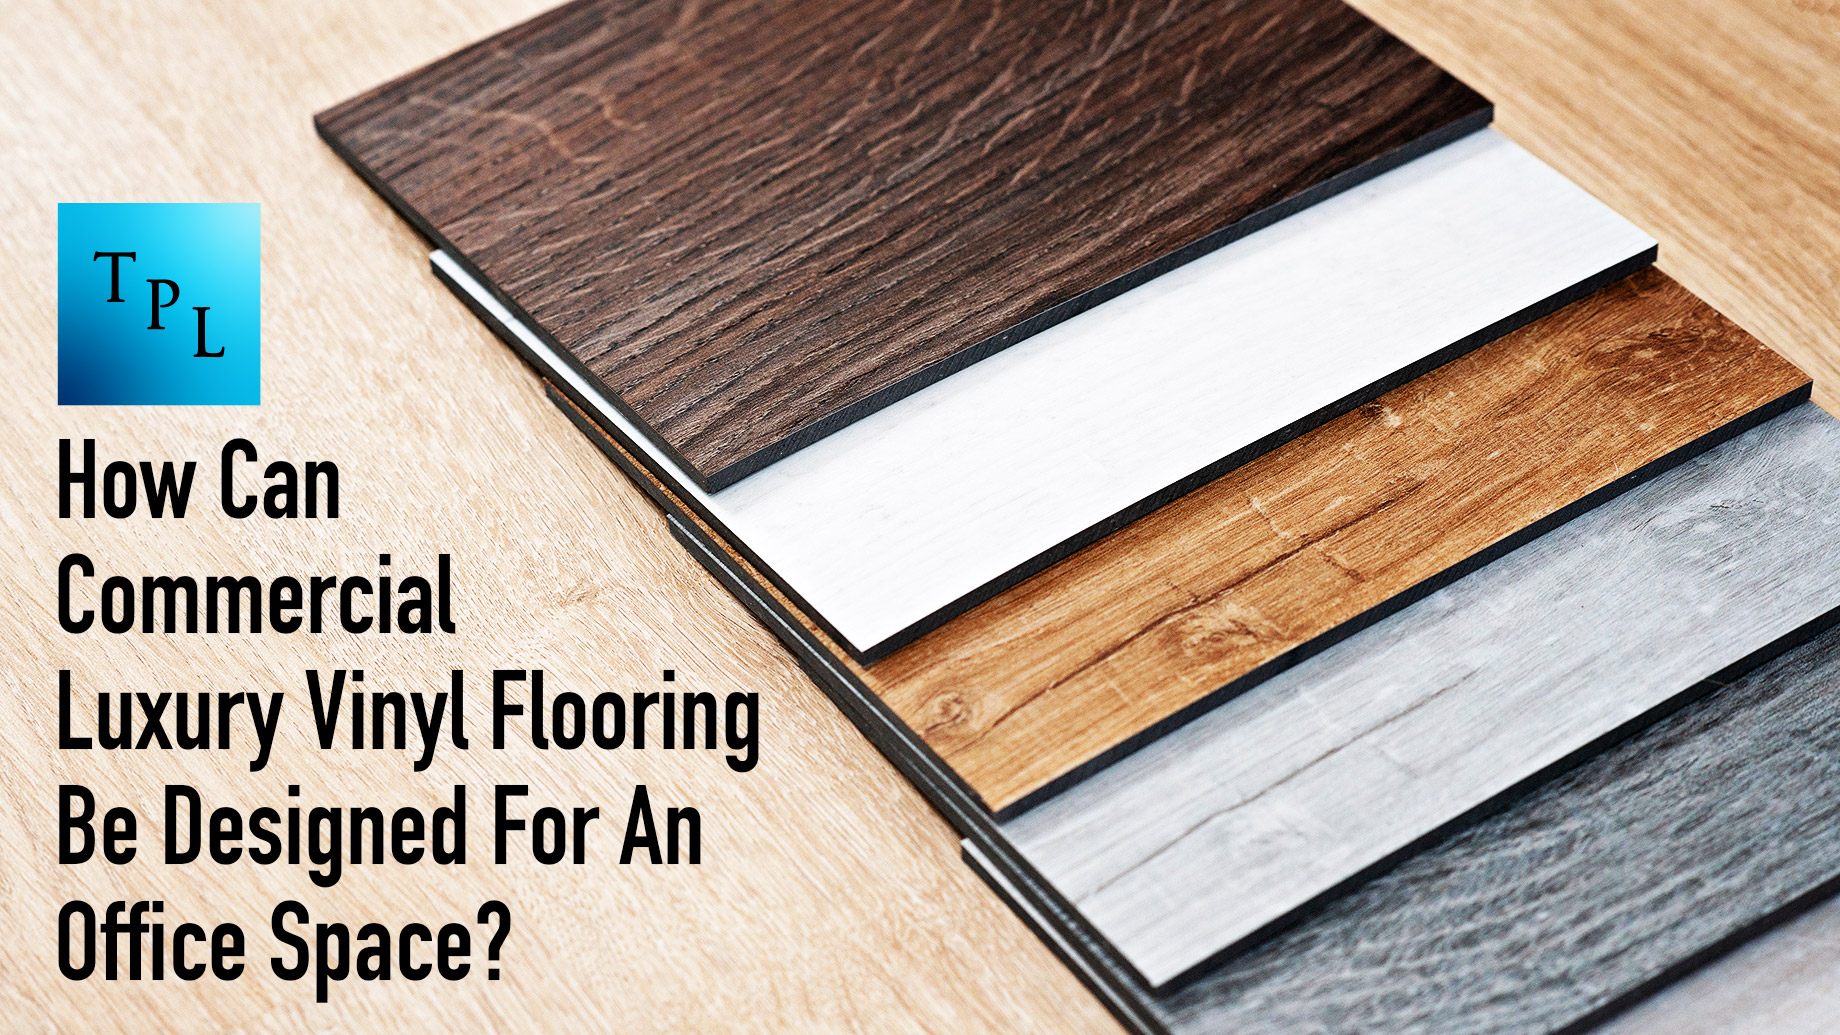 How Can Commercial Luxury Vinyl Flooring Be Designed For An Office Space?